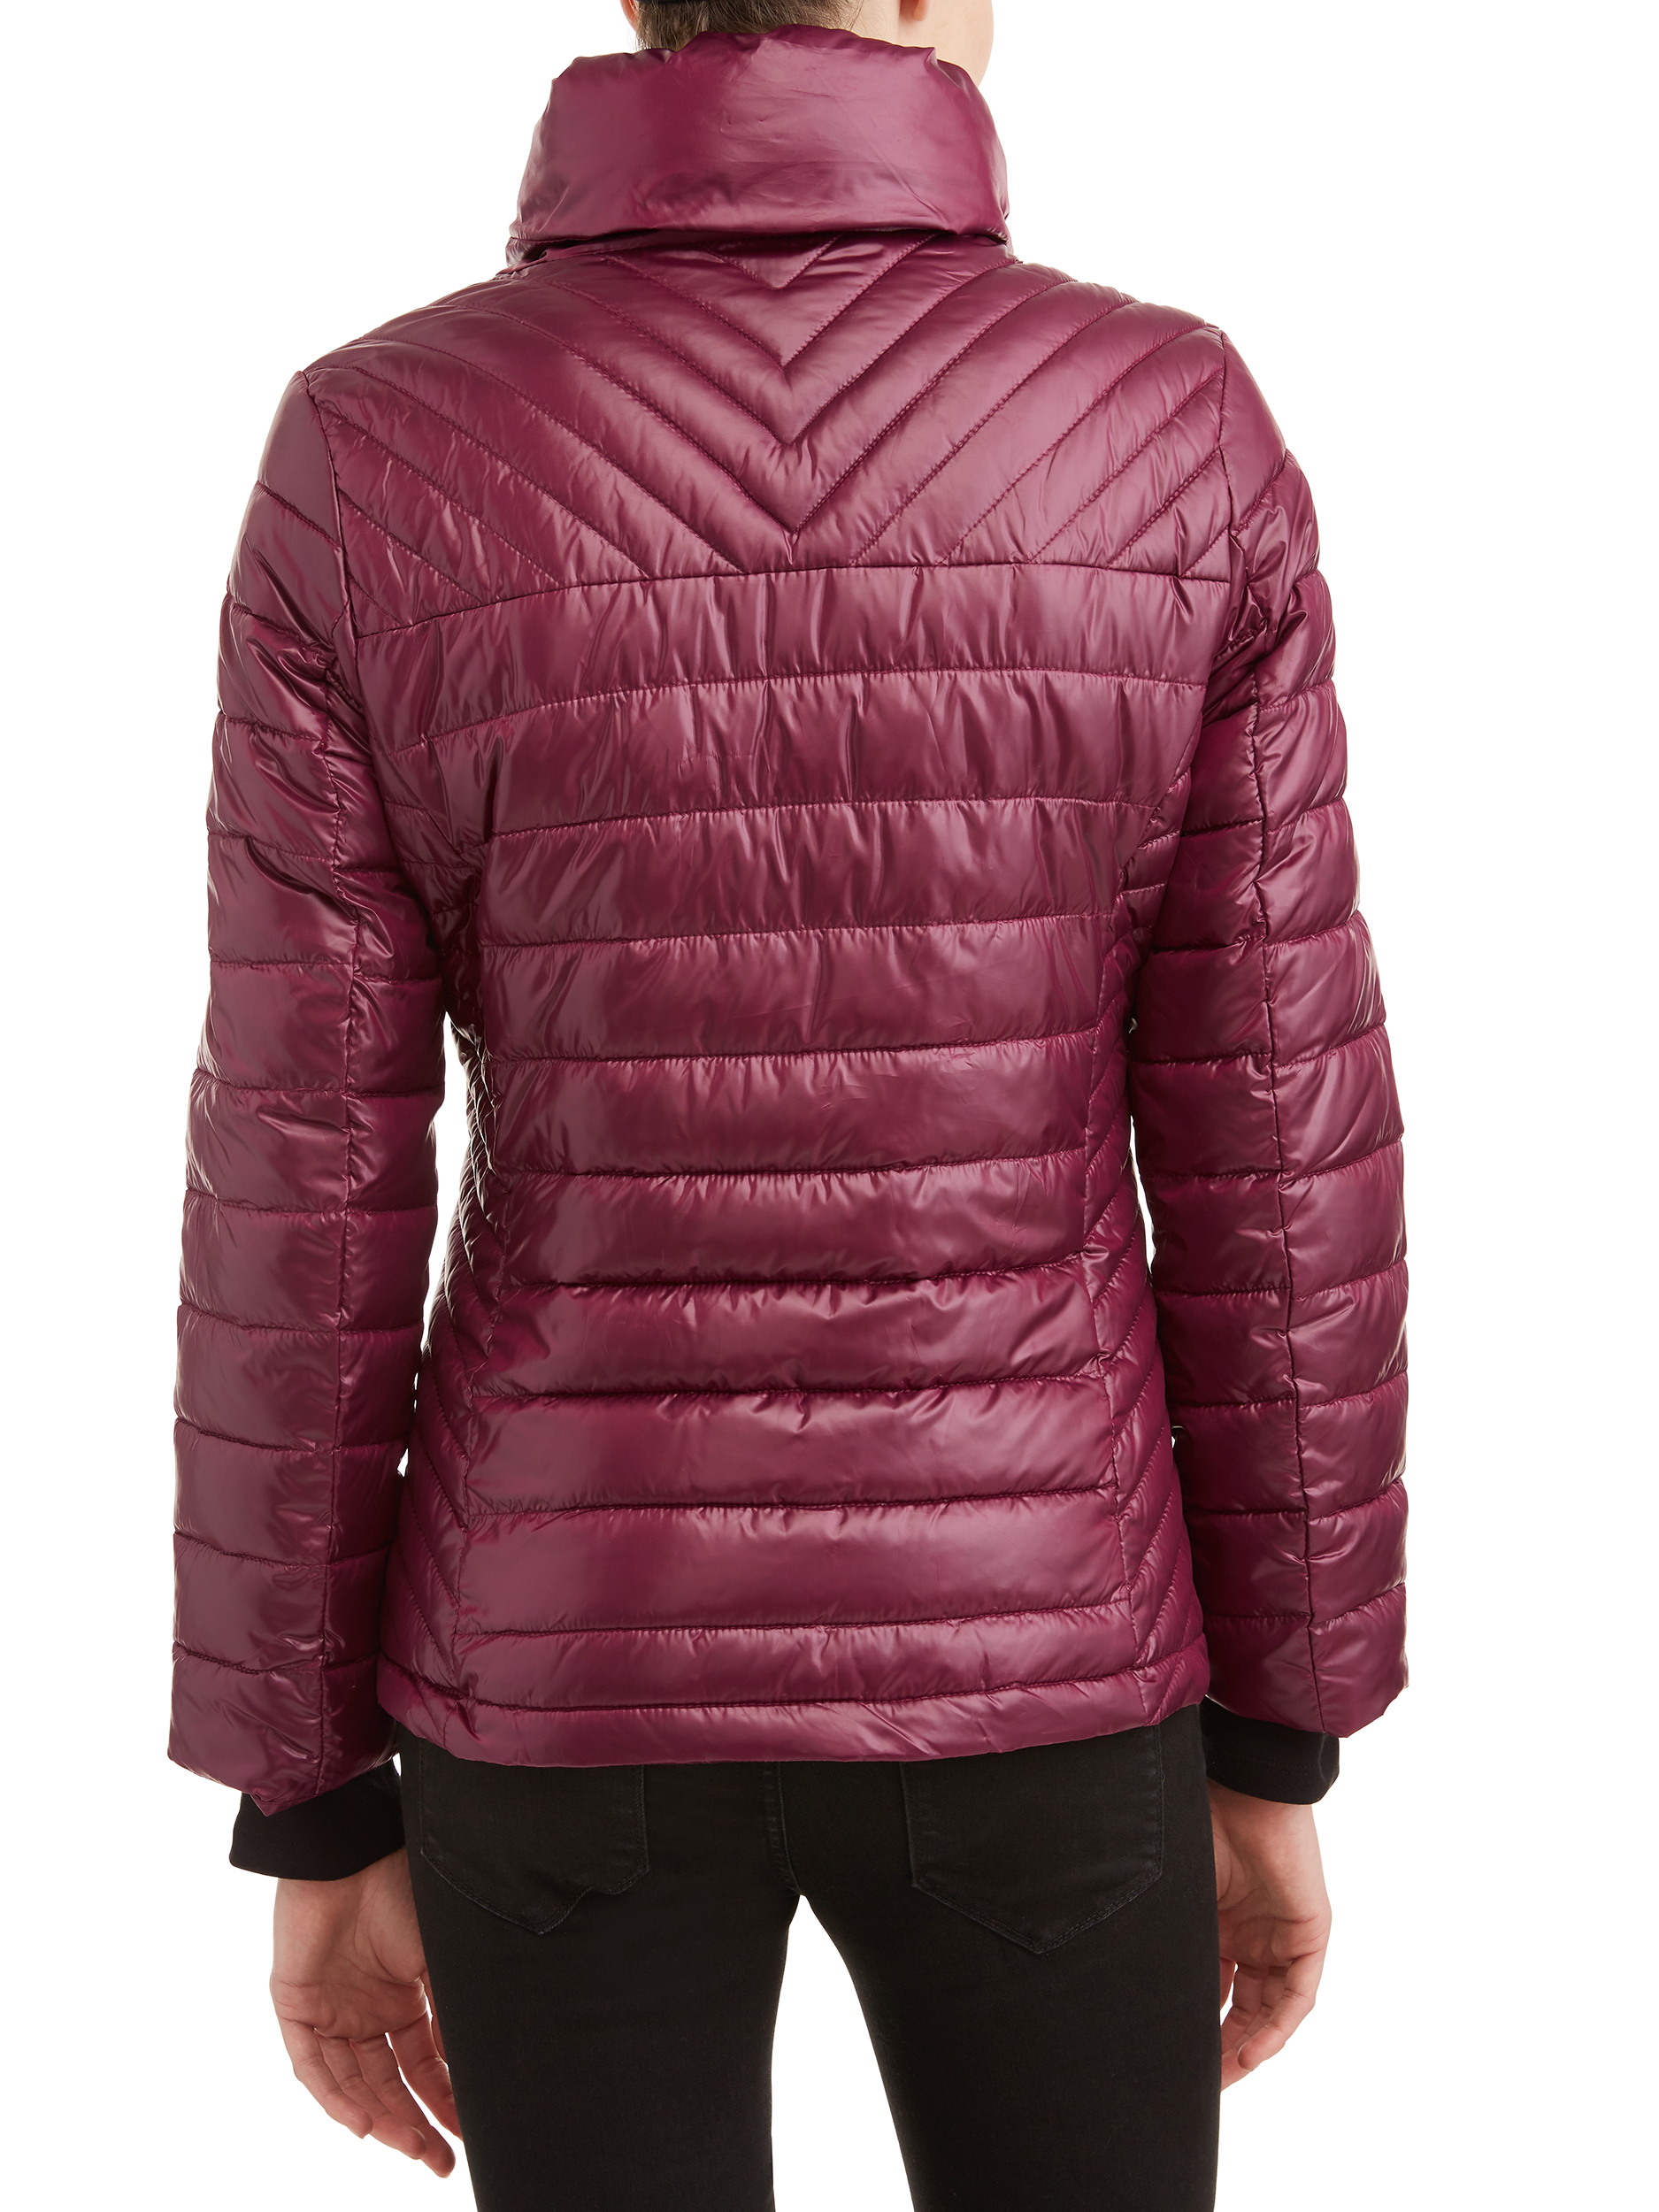 Women's Down Blend Quilted Jacket with Convertible Collar - image 3 of 5